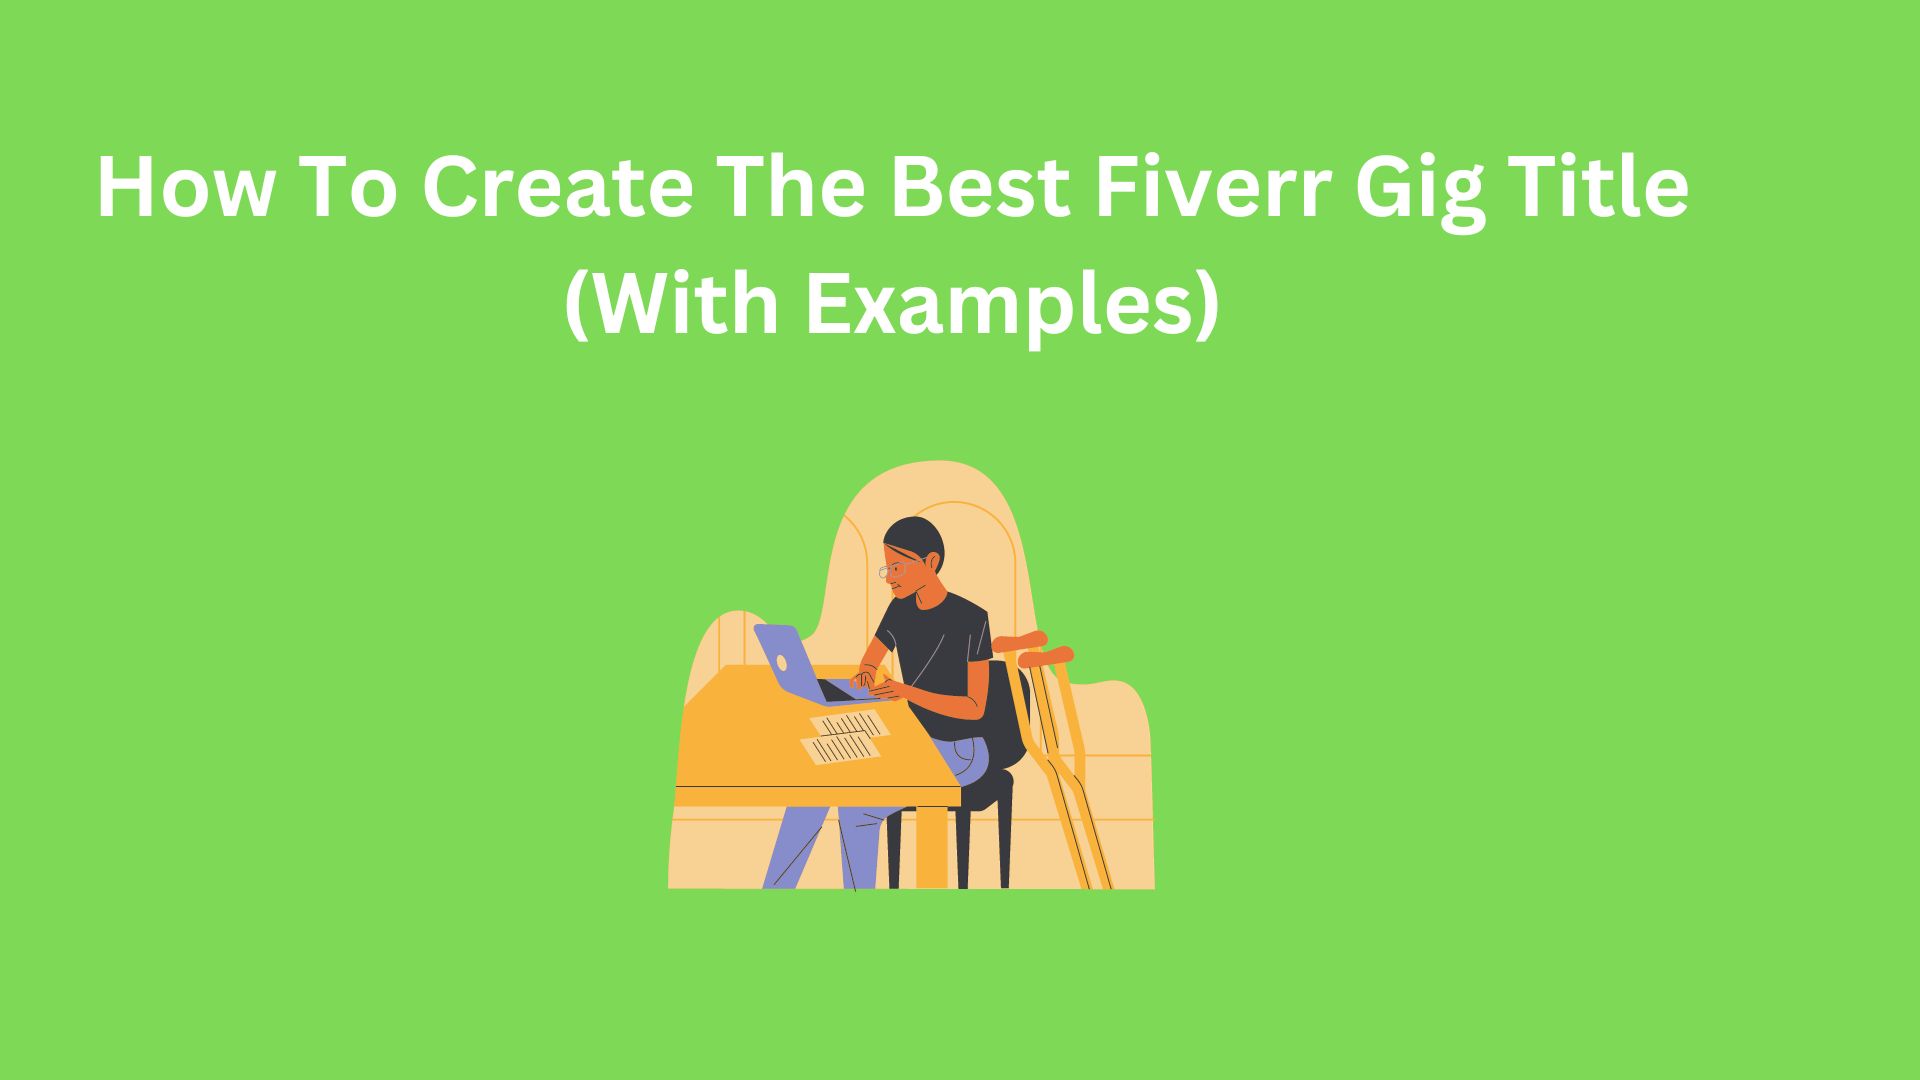 How To Write The Best Fiverr Gig Title For More Sales (With More Than 50 Examples) - The Income Informer